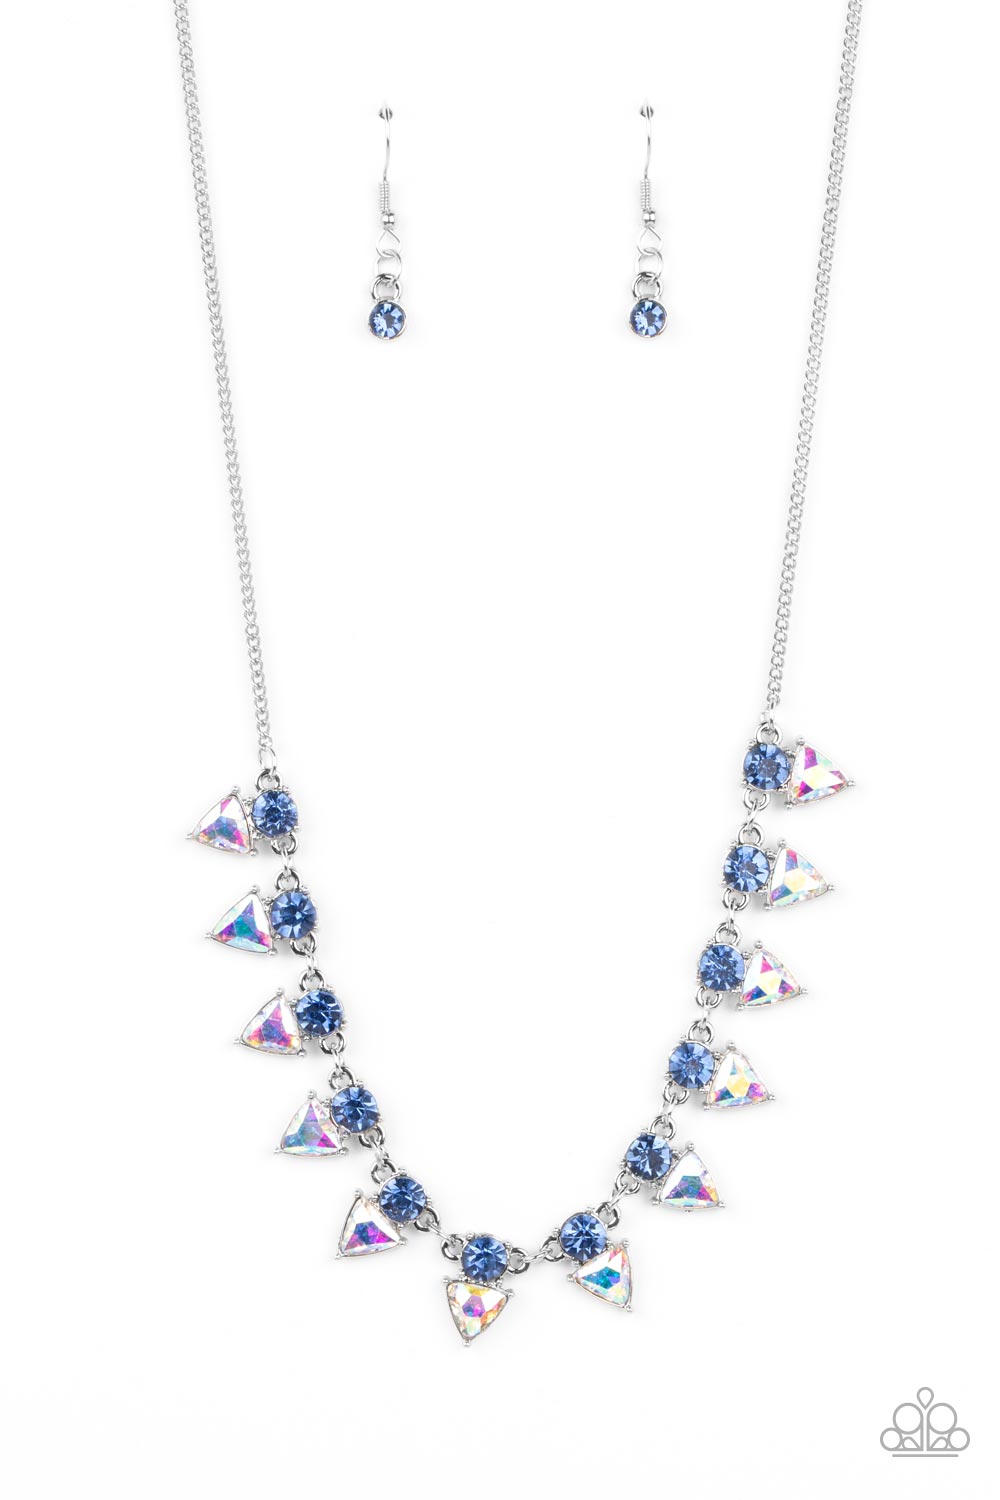 Paparazzi   Razor-Sharp Refinement - Blue Necklace - A Finishing Touch Jewelry